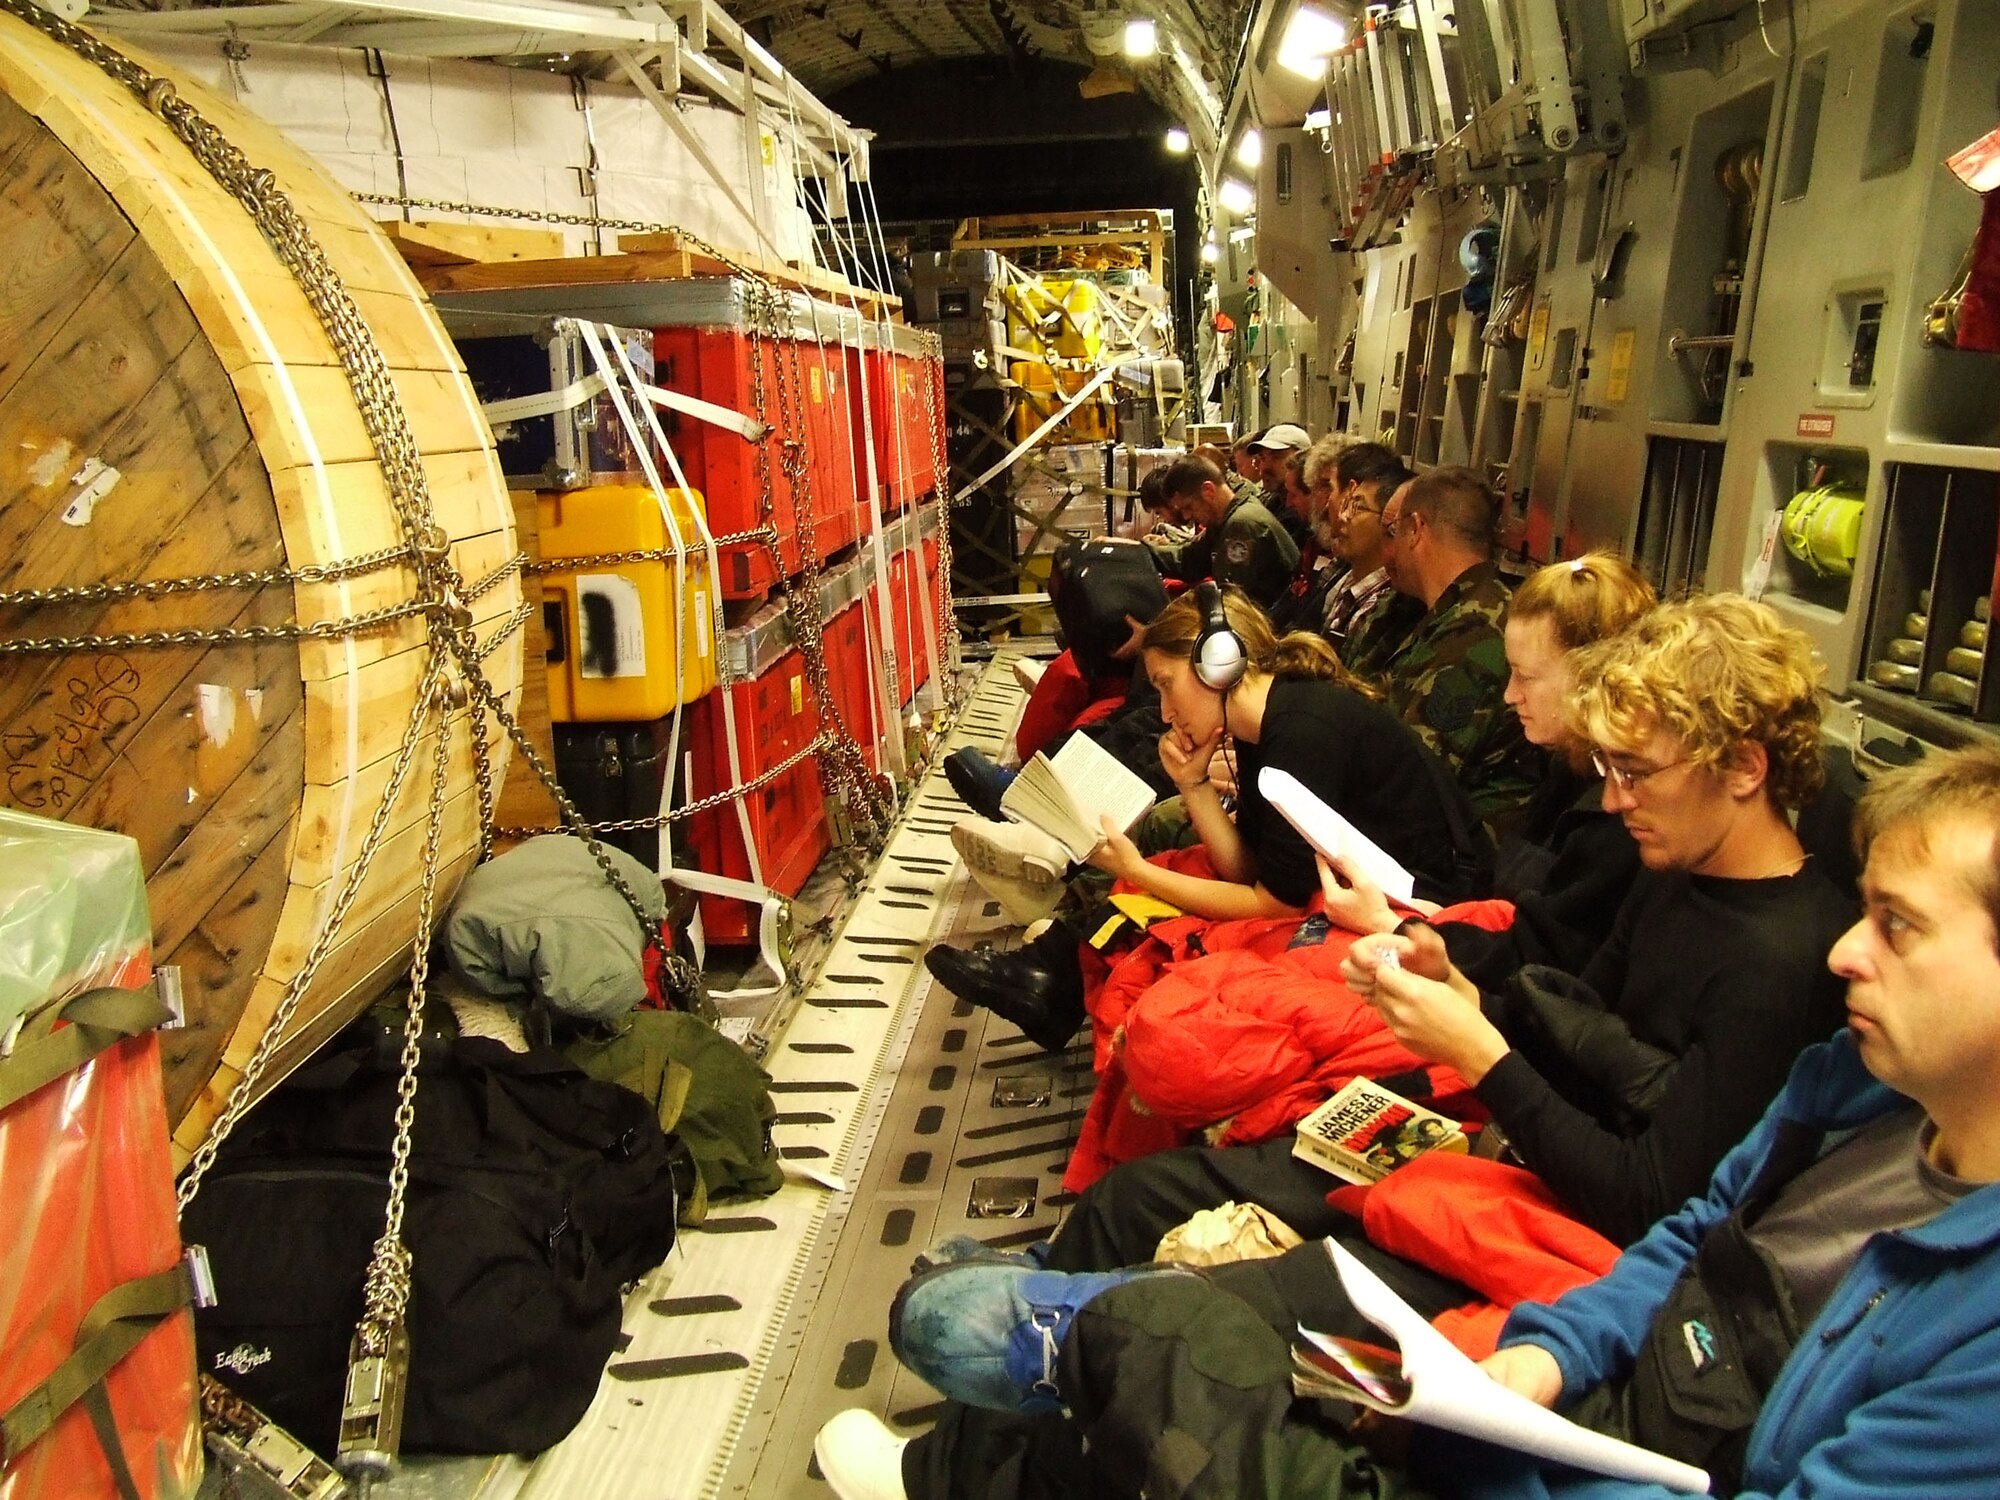 MCMURDO STATION, Antarctica - National Science Foundation personnel pass the time during a flight on a McChord C-17 Globemaster III from Christchurch, New Zealand, to Antarctica Nov. 14, 2006. U.S. Air Force Photo/ By 1st Lt Erika Yepsen